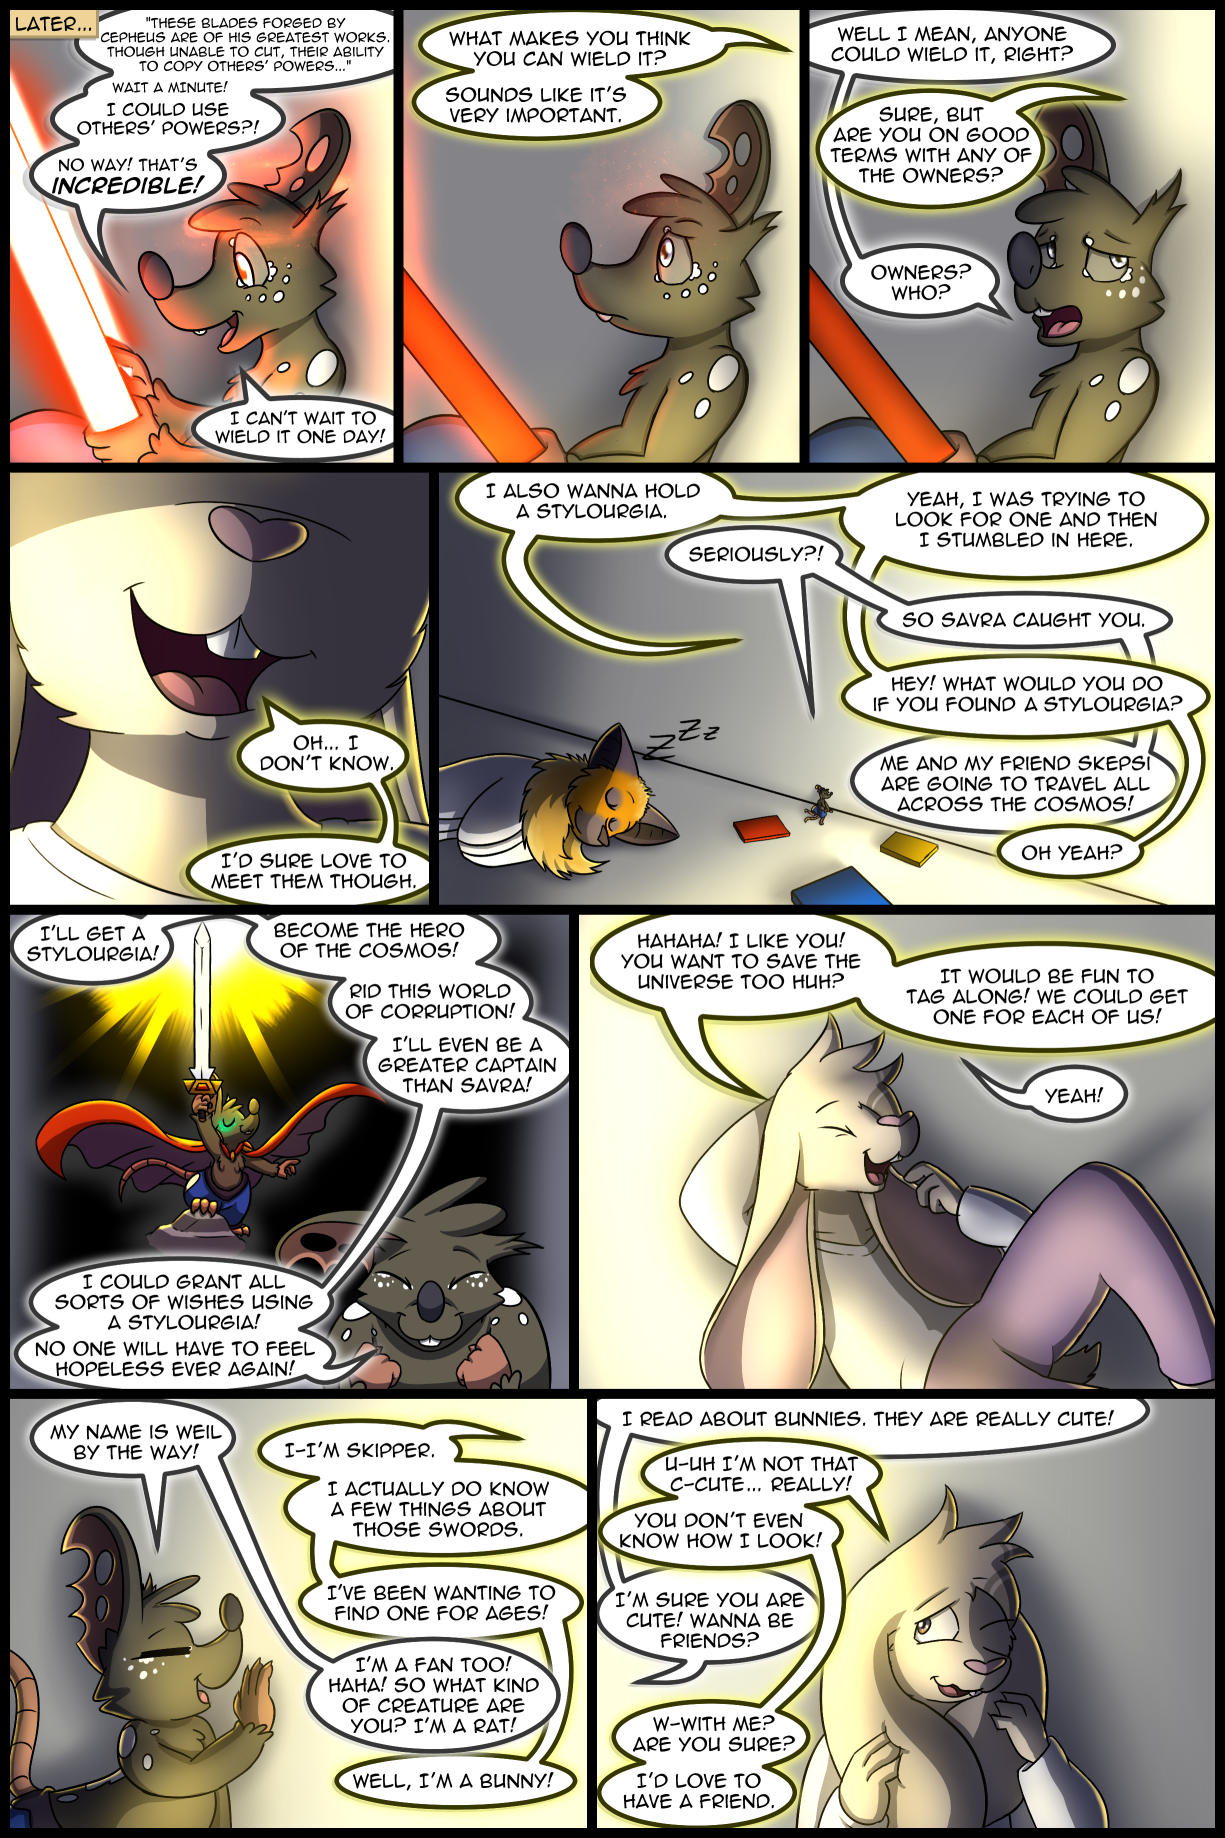 Ch4 Page 40 – Stylourgia